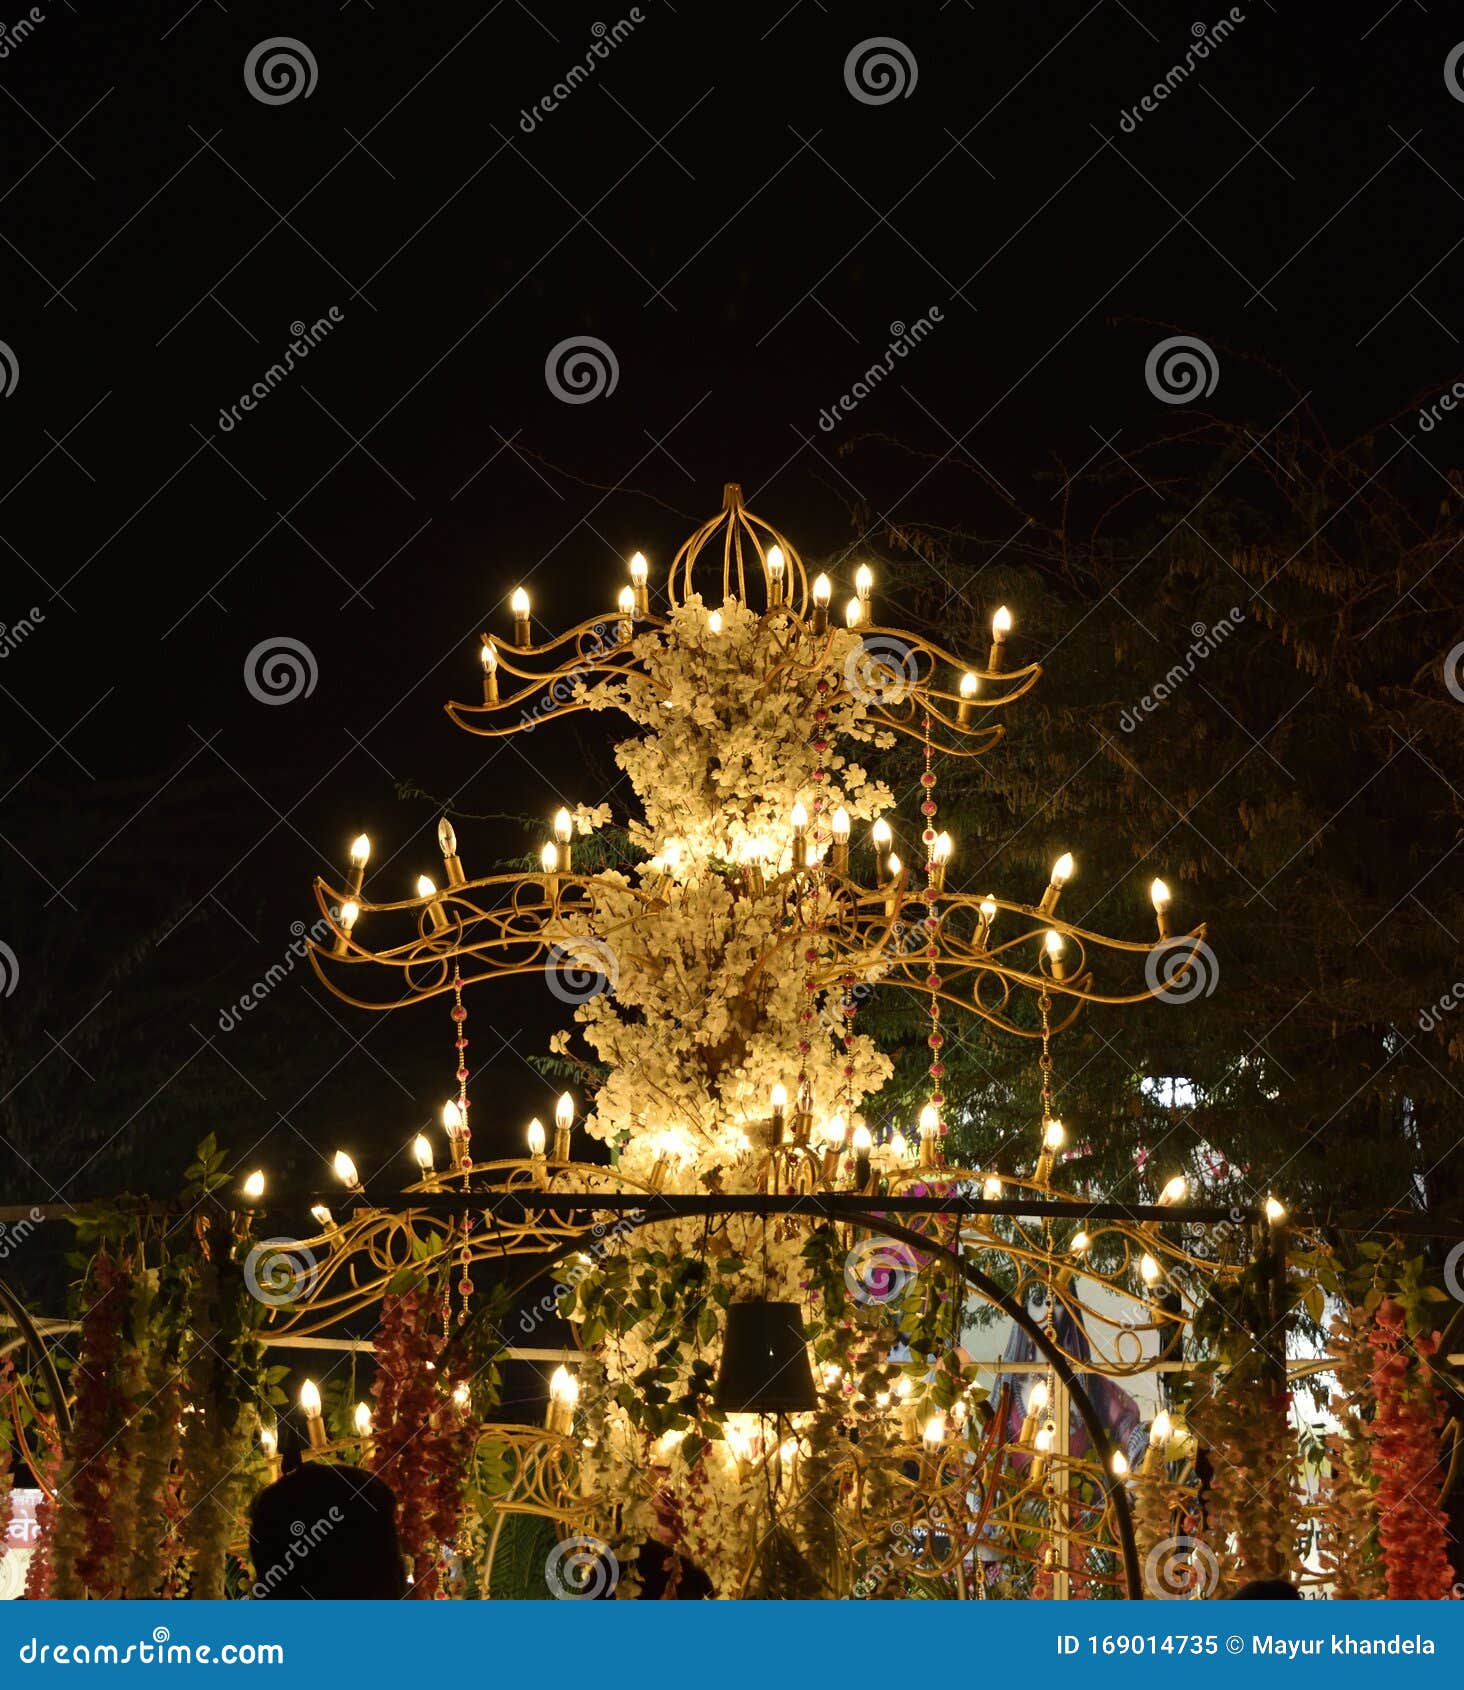 Candle and Flowers Decoration on Christmas Festival, Udaipur, India ...